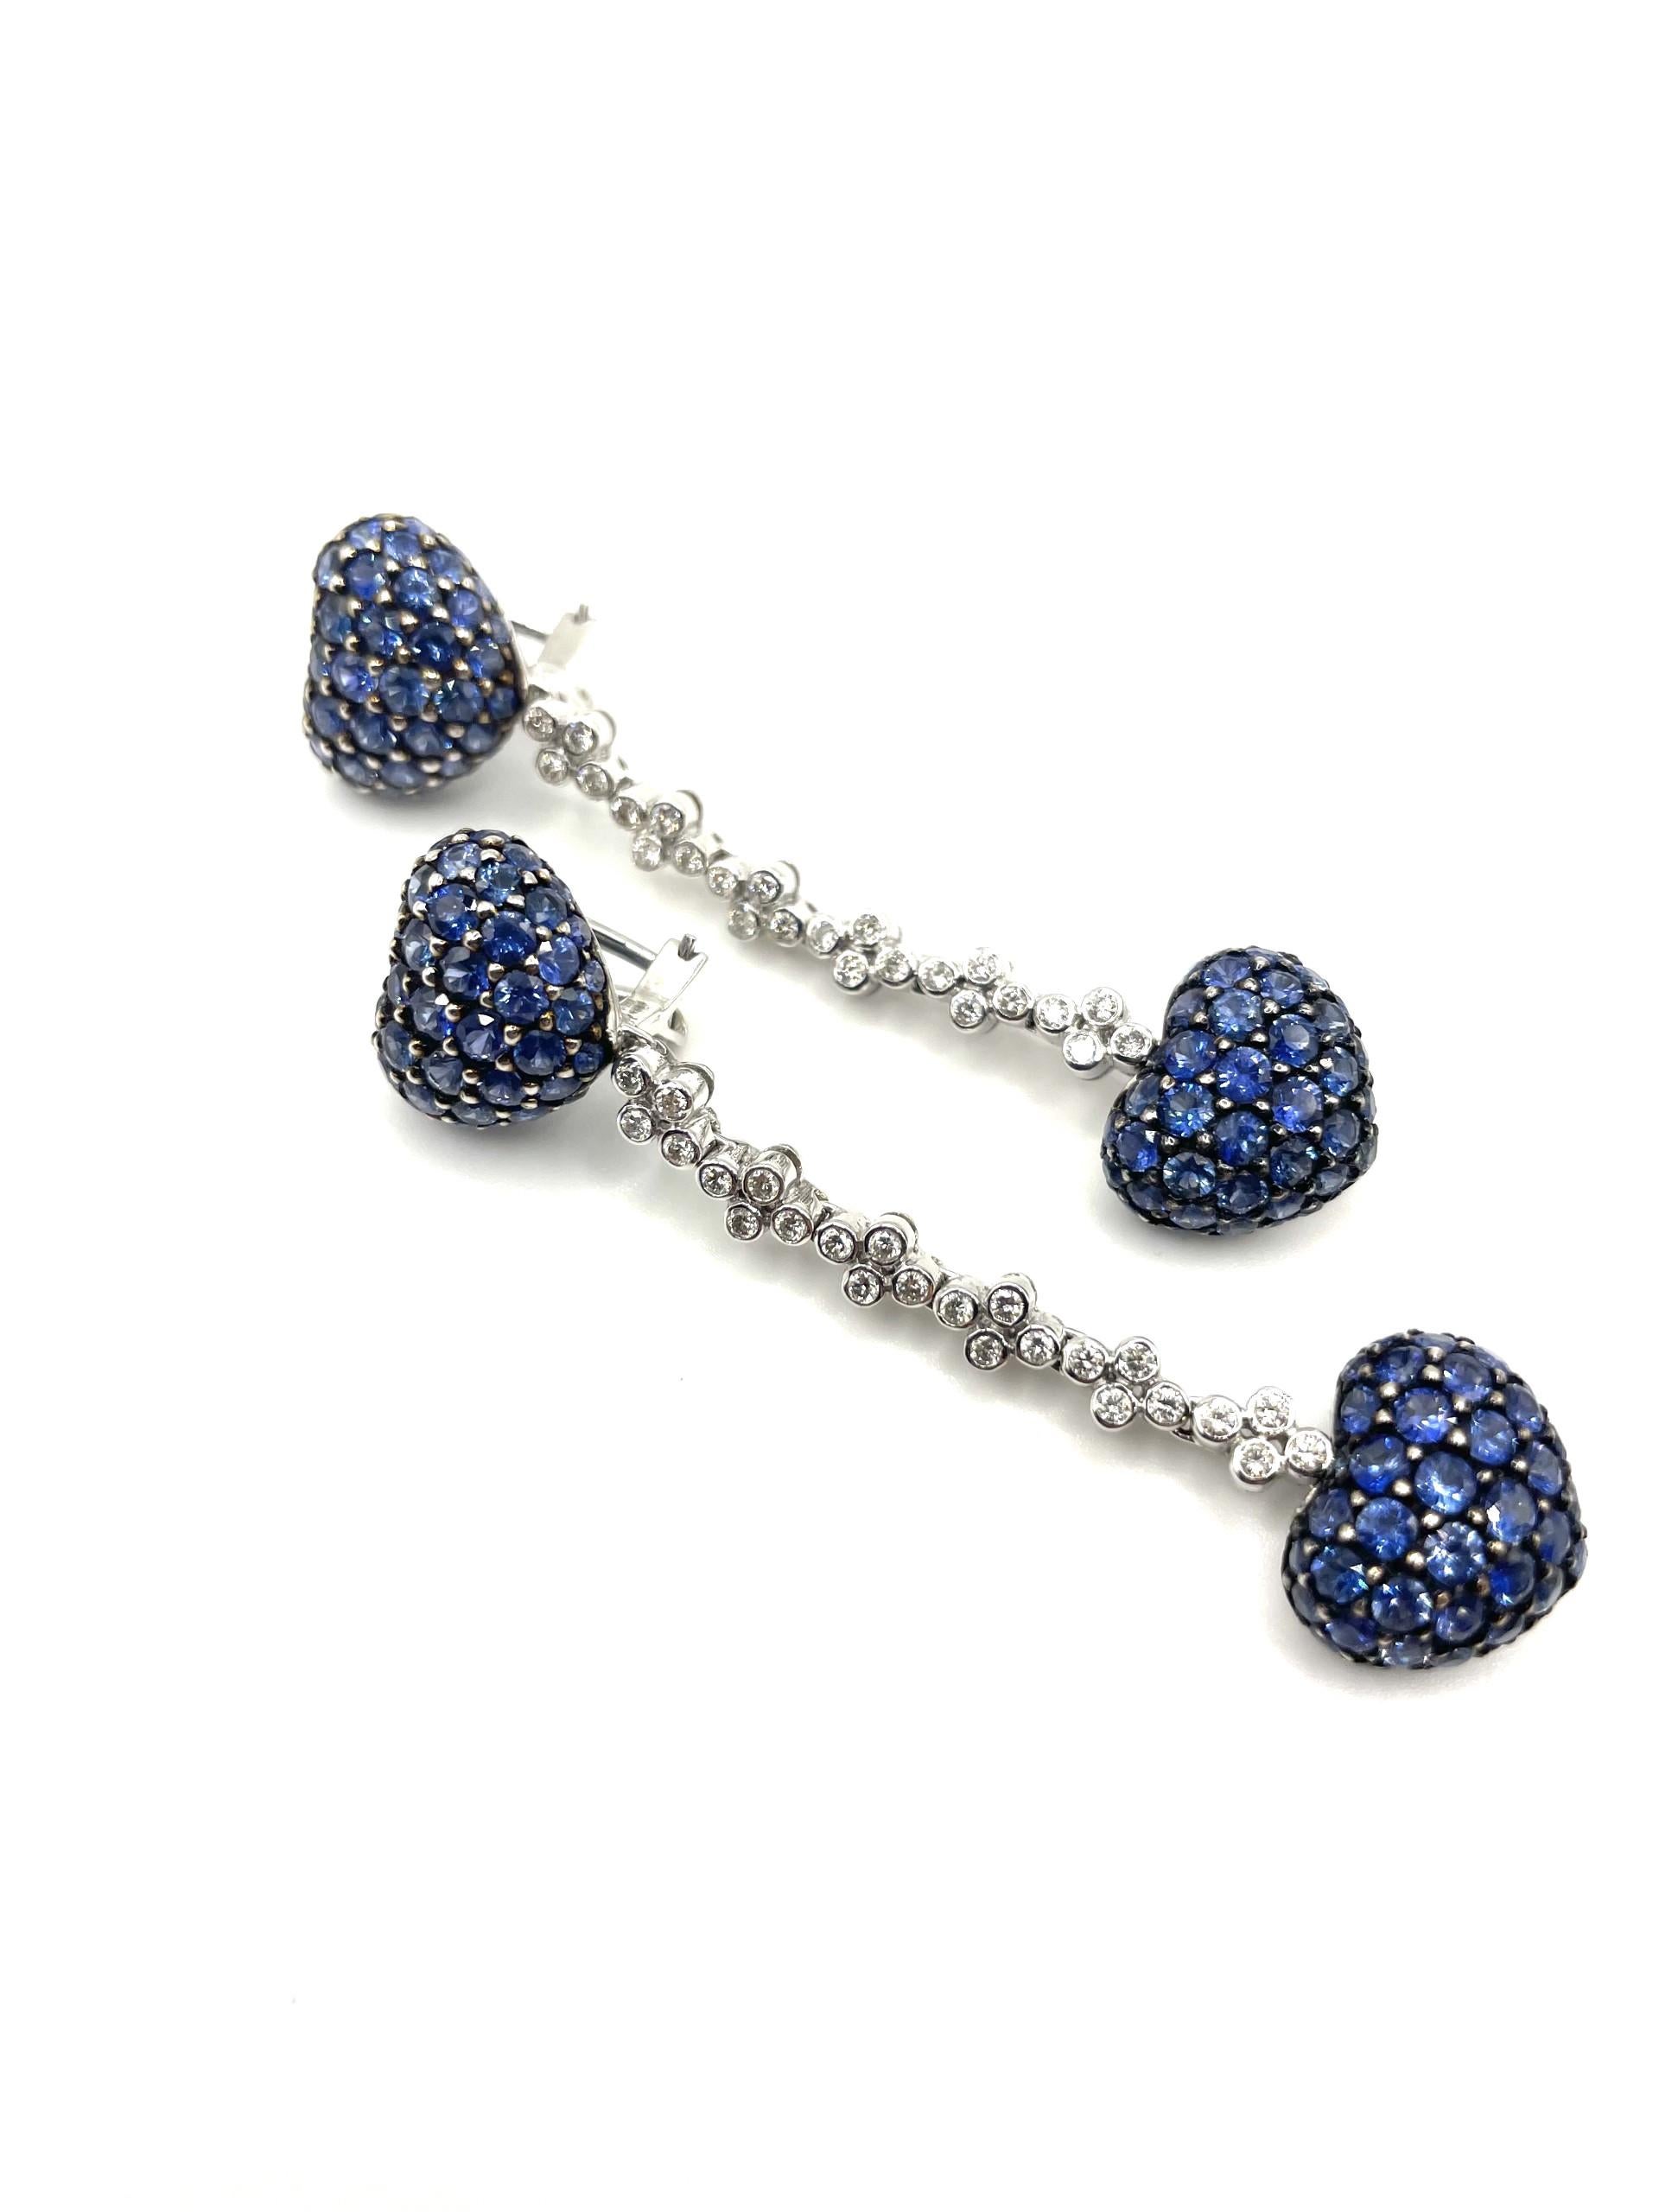 A pair of heart to heart drop earrings set with natural blue sapphires with a black rhodium accent and natural diamonds in 18kt white gold with straight post and omega clip system.

176 natural blue sapphires 9.22ct total weighty

48 brilliant cut